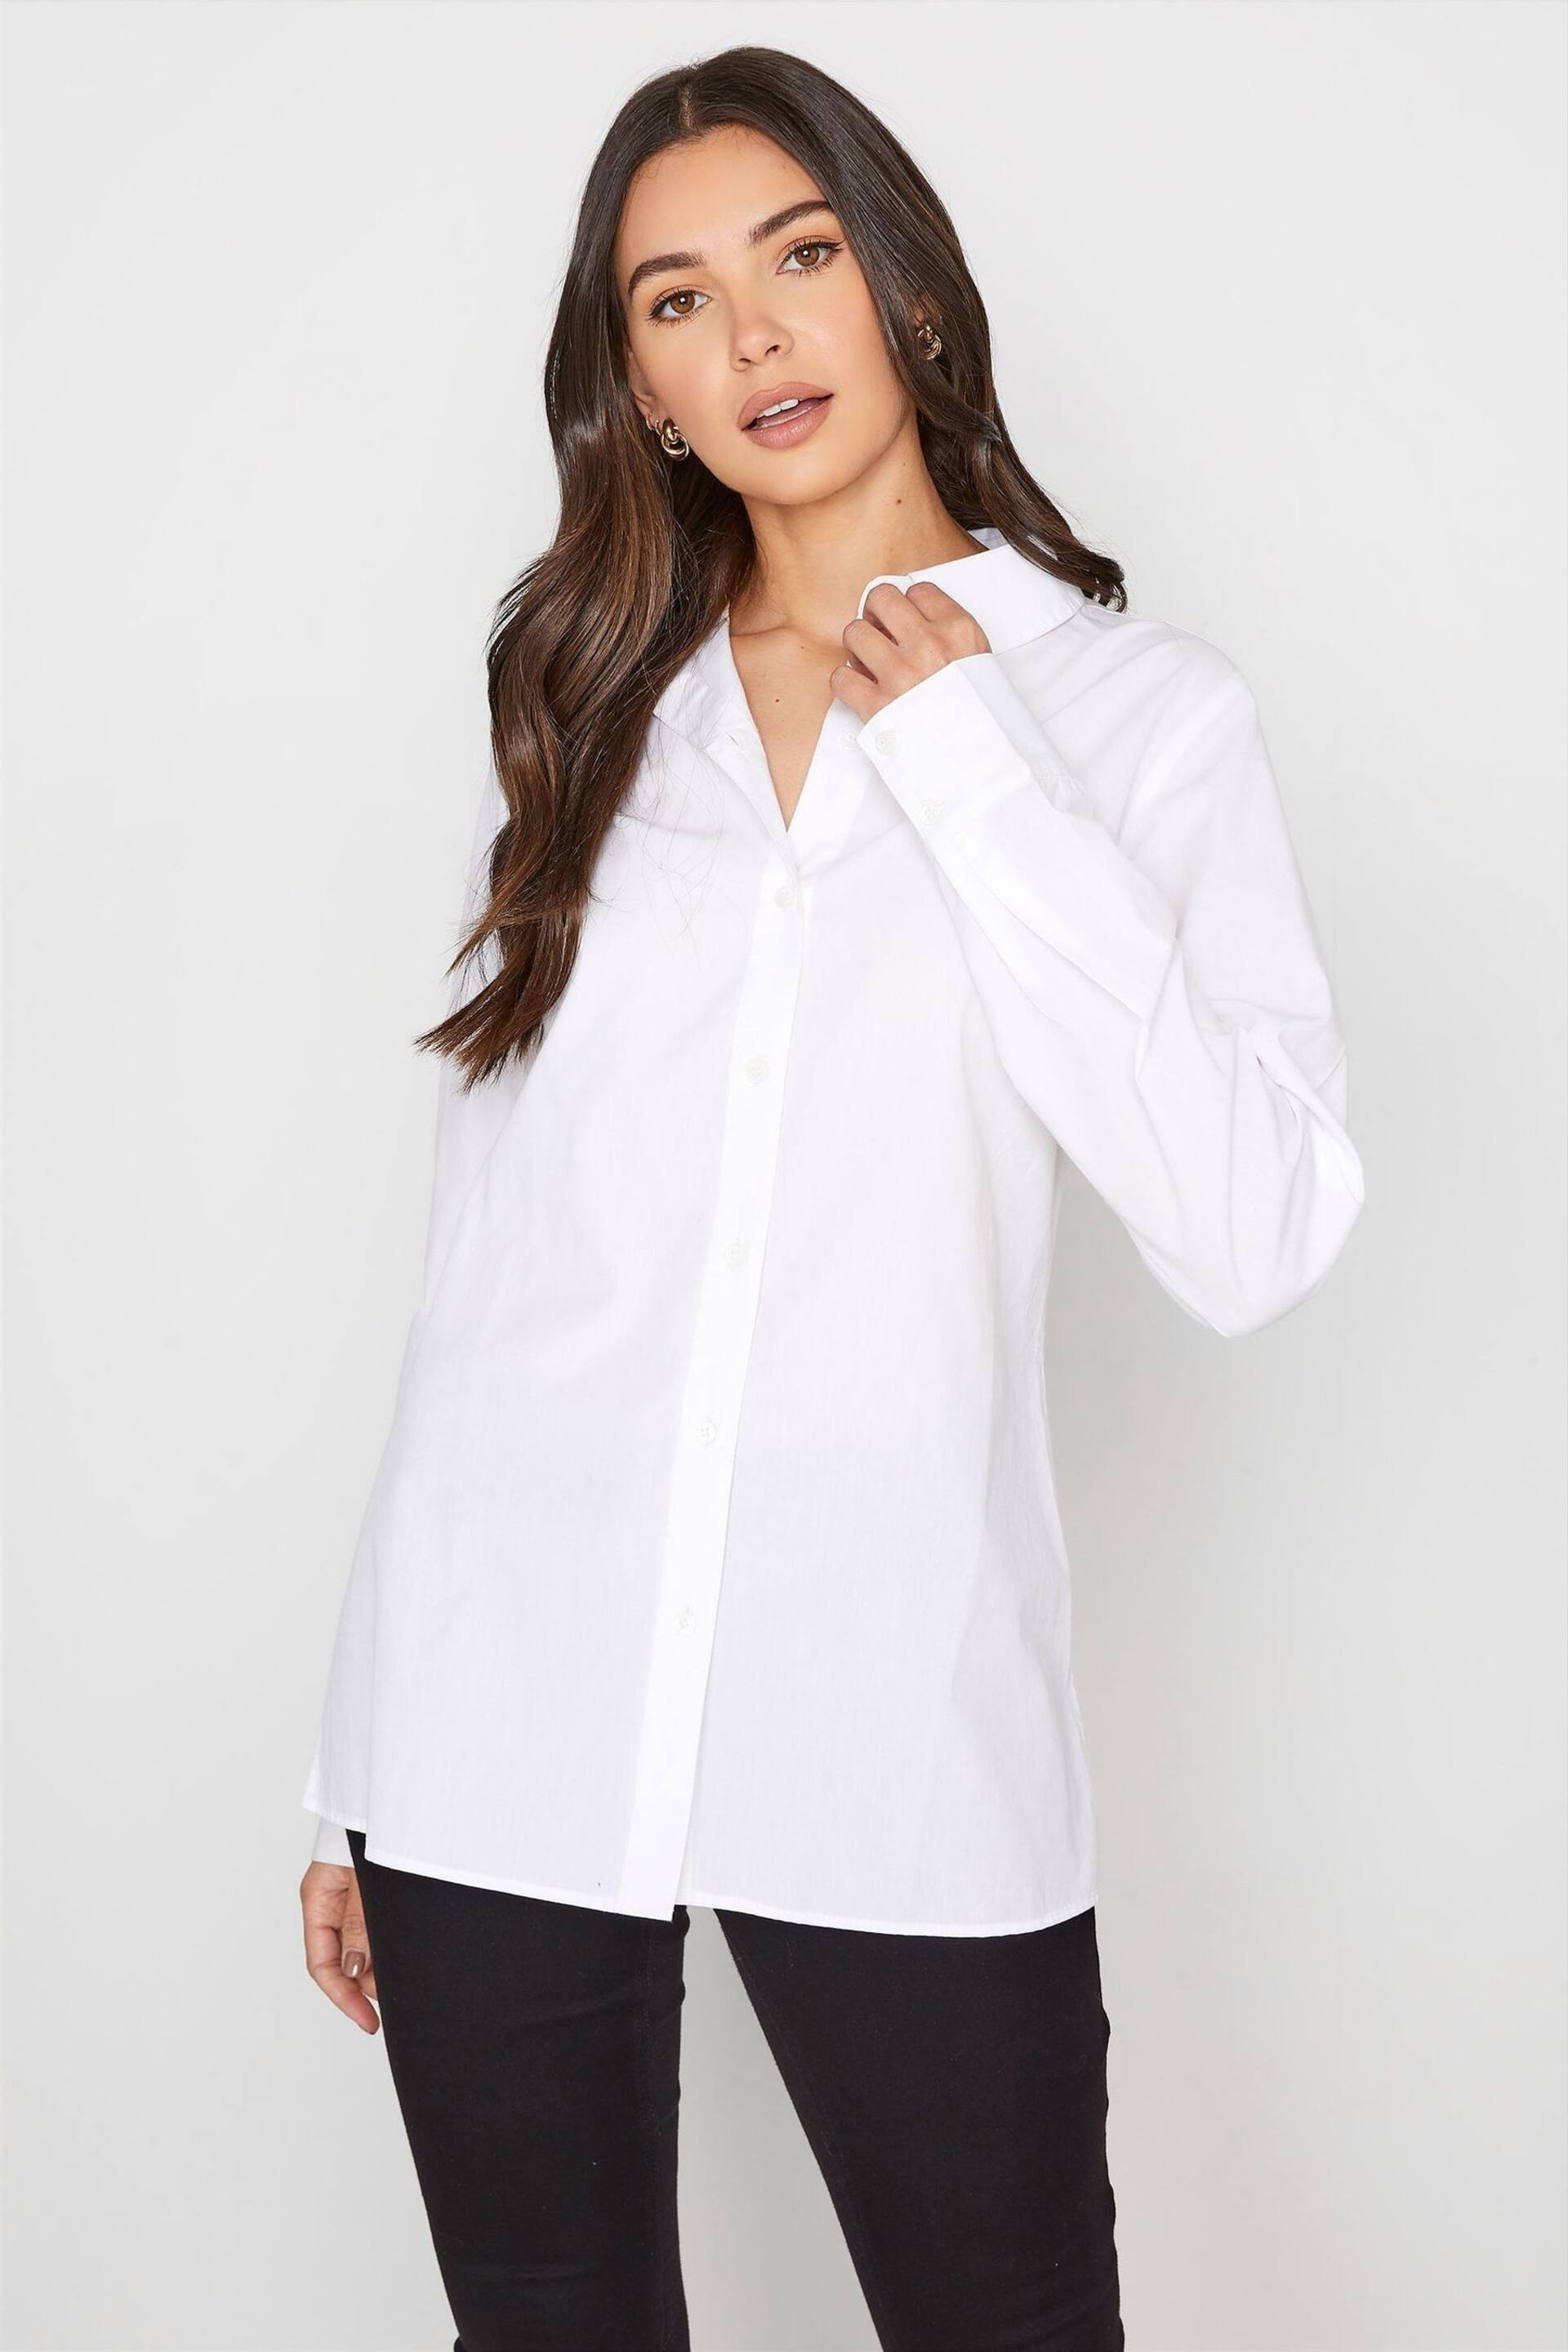 Long Tall Sally White Cotton Shirt - Image 1 of 3